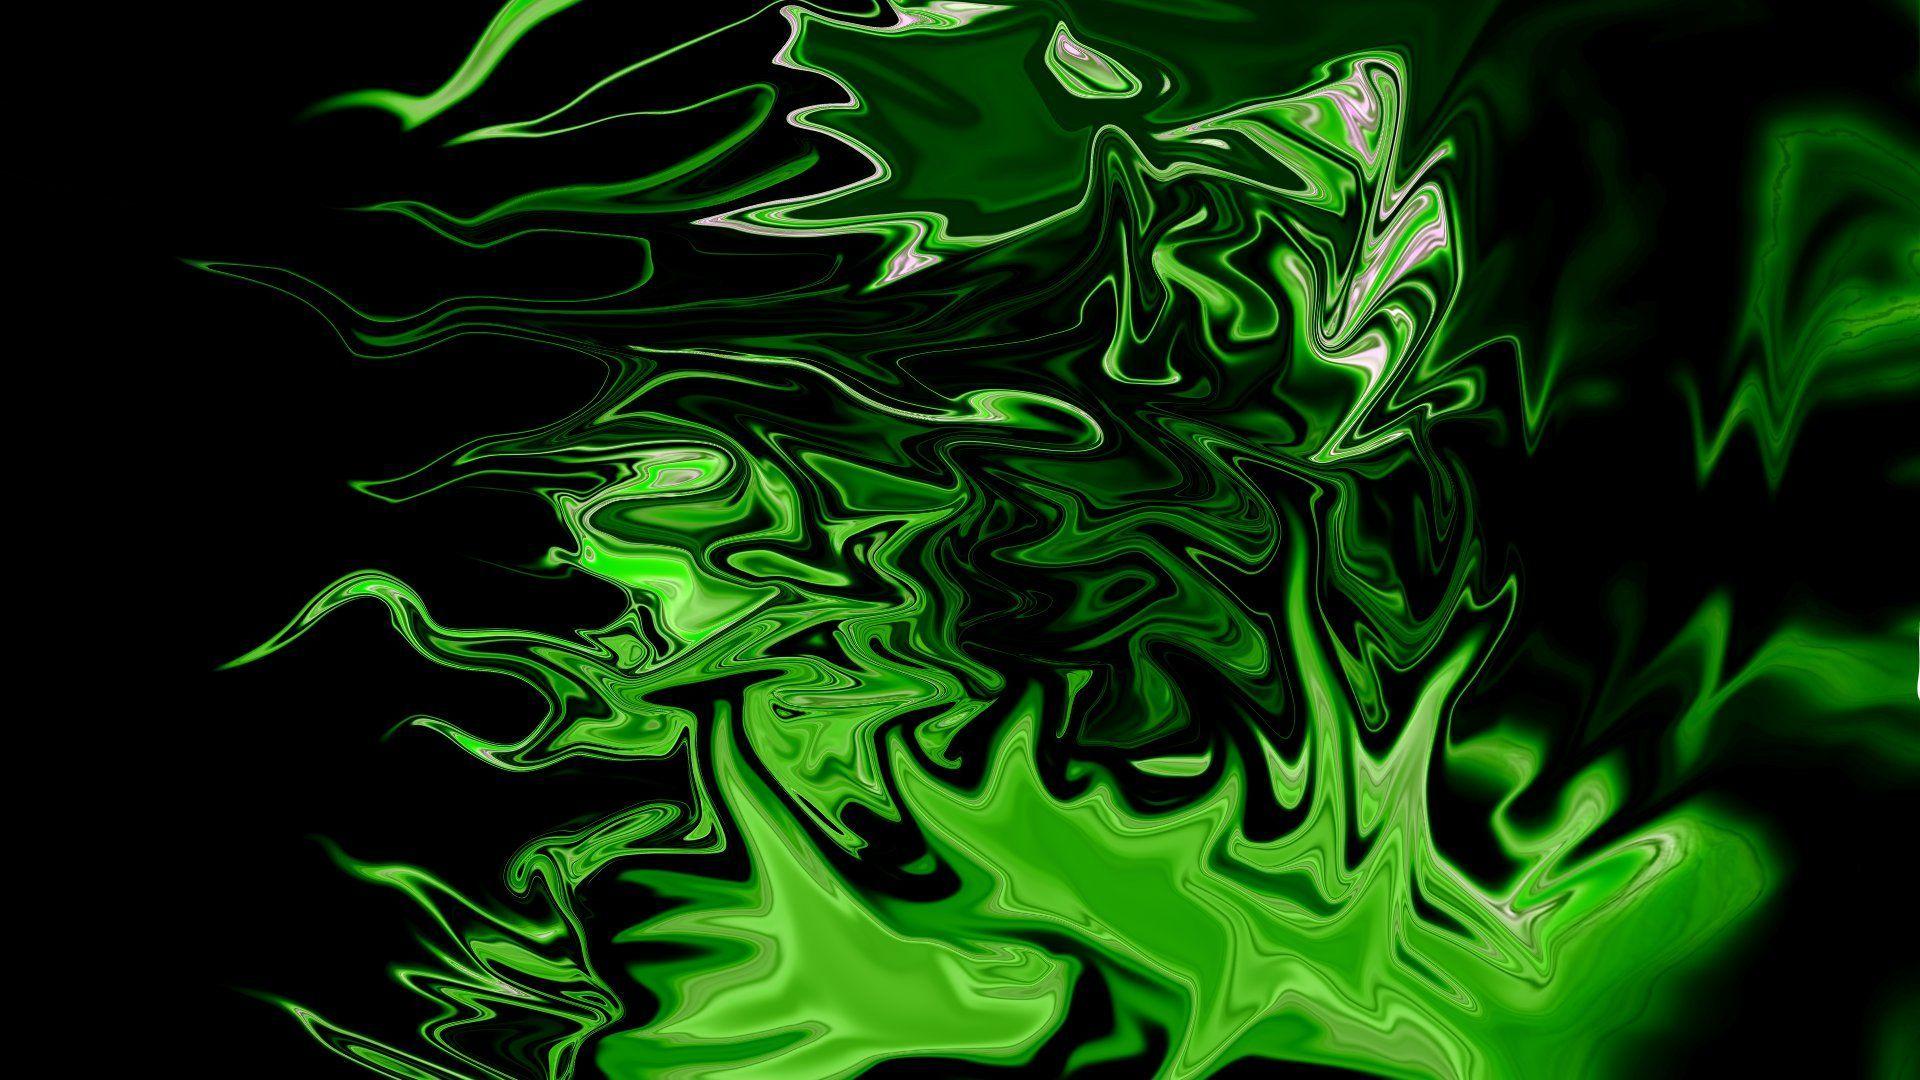 Black and Neon Green Wallpaper. Neon. Neon, Abstract